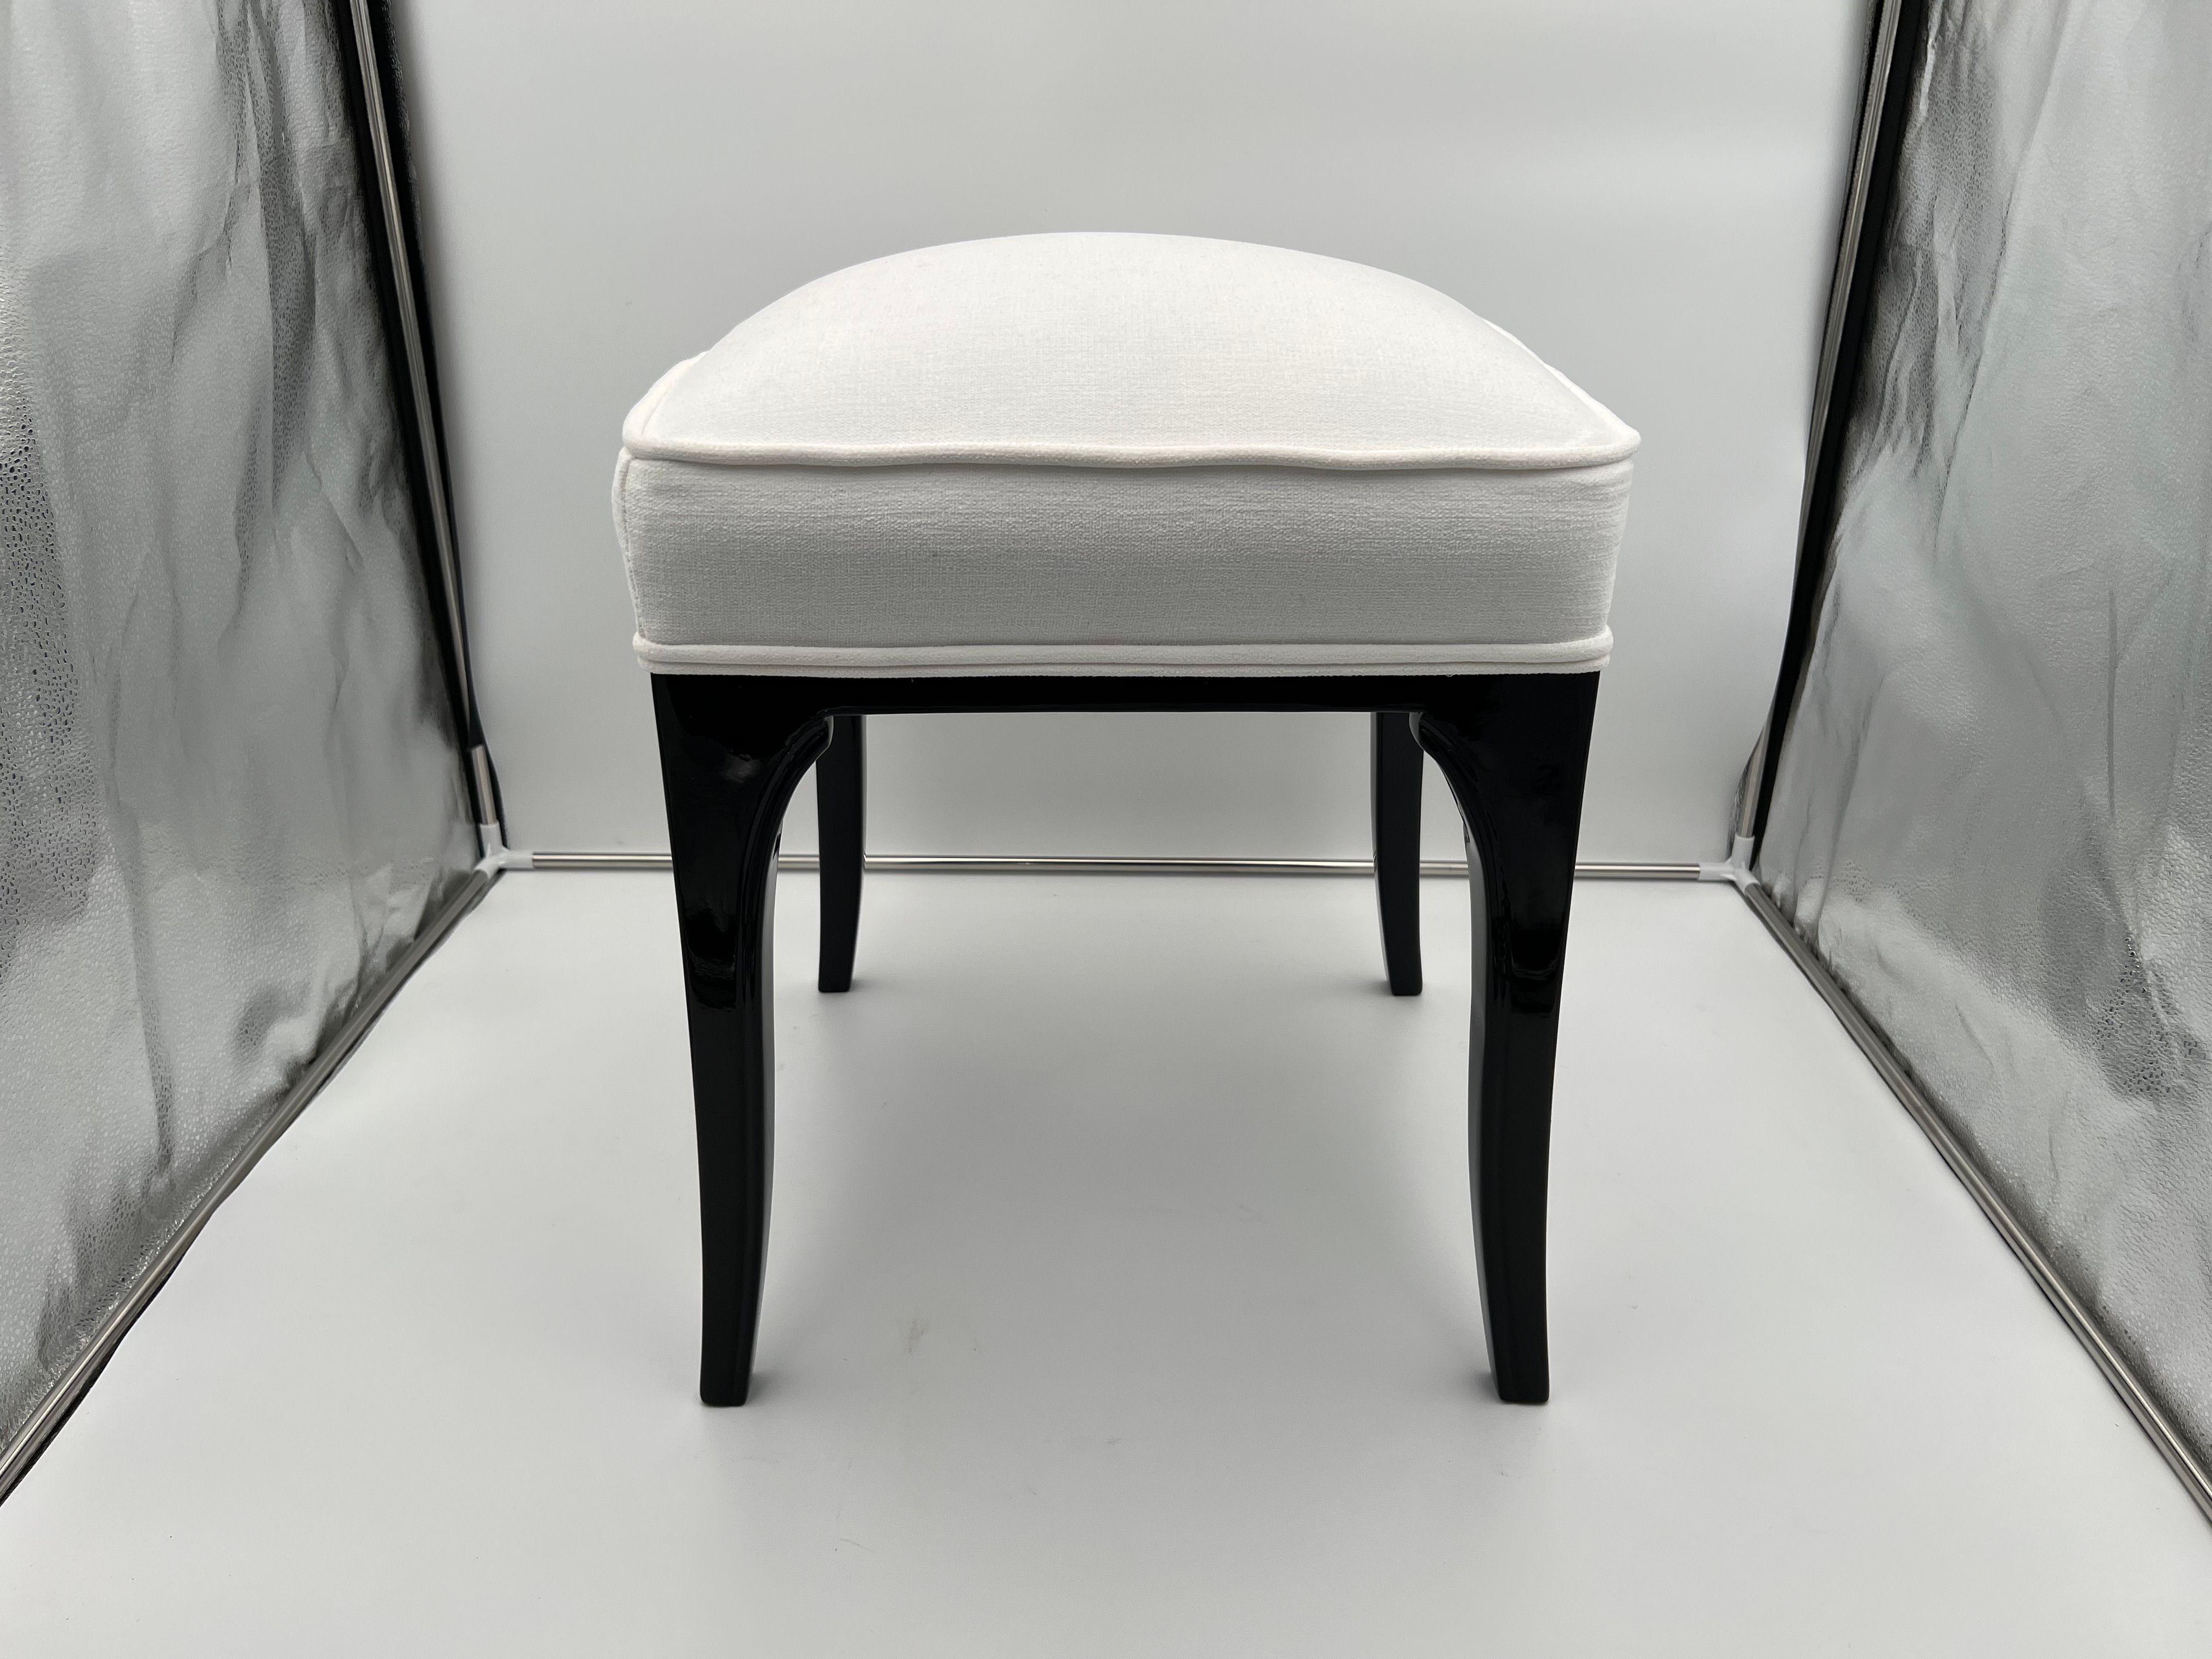 Original Art Deco stool, black lacquered Oak solid wood, France circa 1940

Elegantly curved legs, glossy black piano lacquer. Upholstered with white fabric and double keder.

Dimensions : 
H 51 cm x W 40 cm x D 40 cm
H 20.1 in. x W 15.75 in. x D